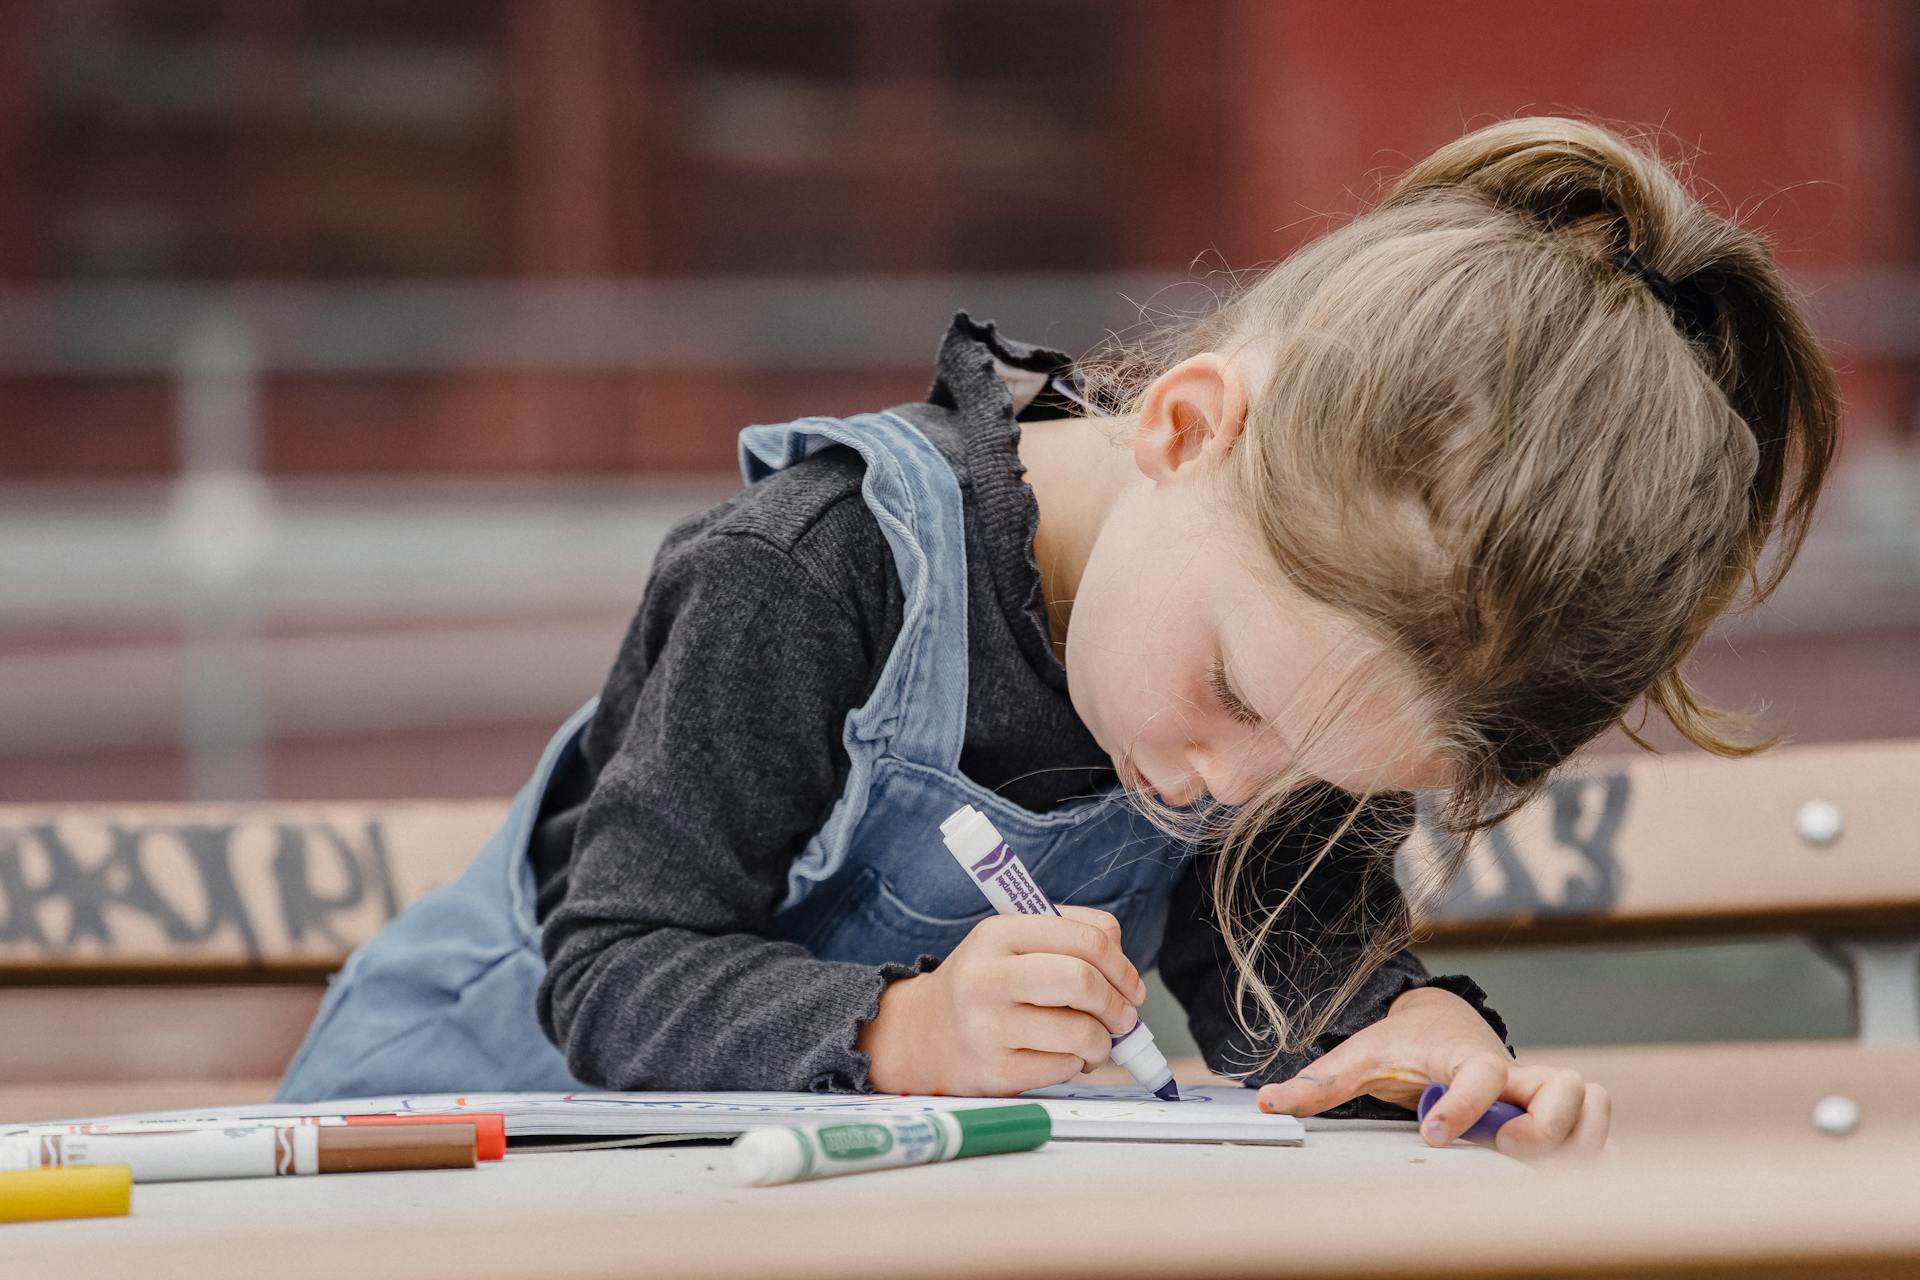 A little girl drawing | Source: Pexels